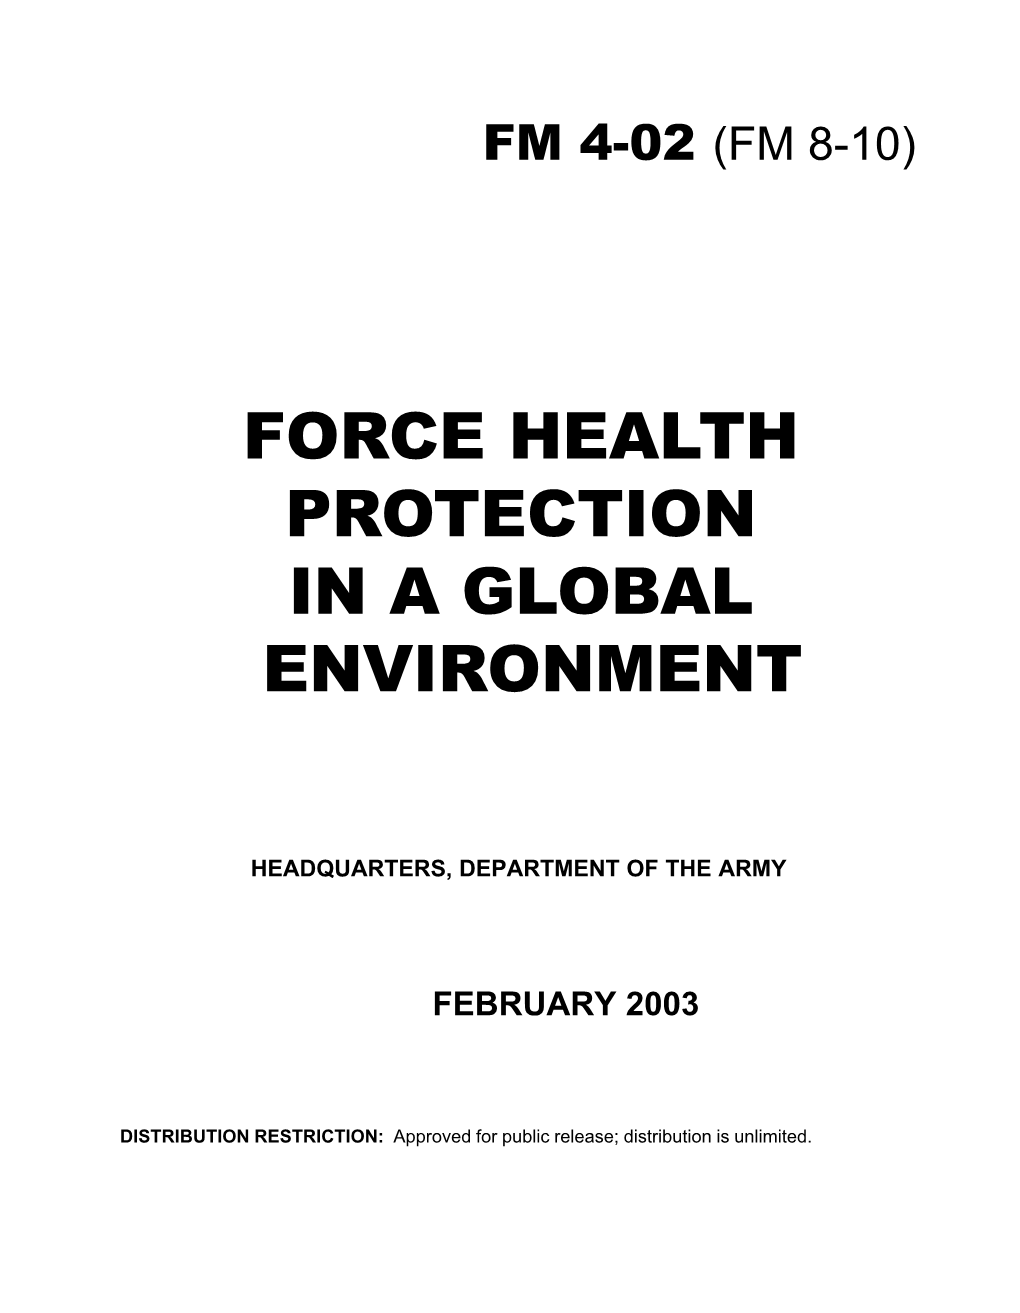 FM 4-02 Force Health Protection in a Global Environment